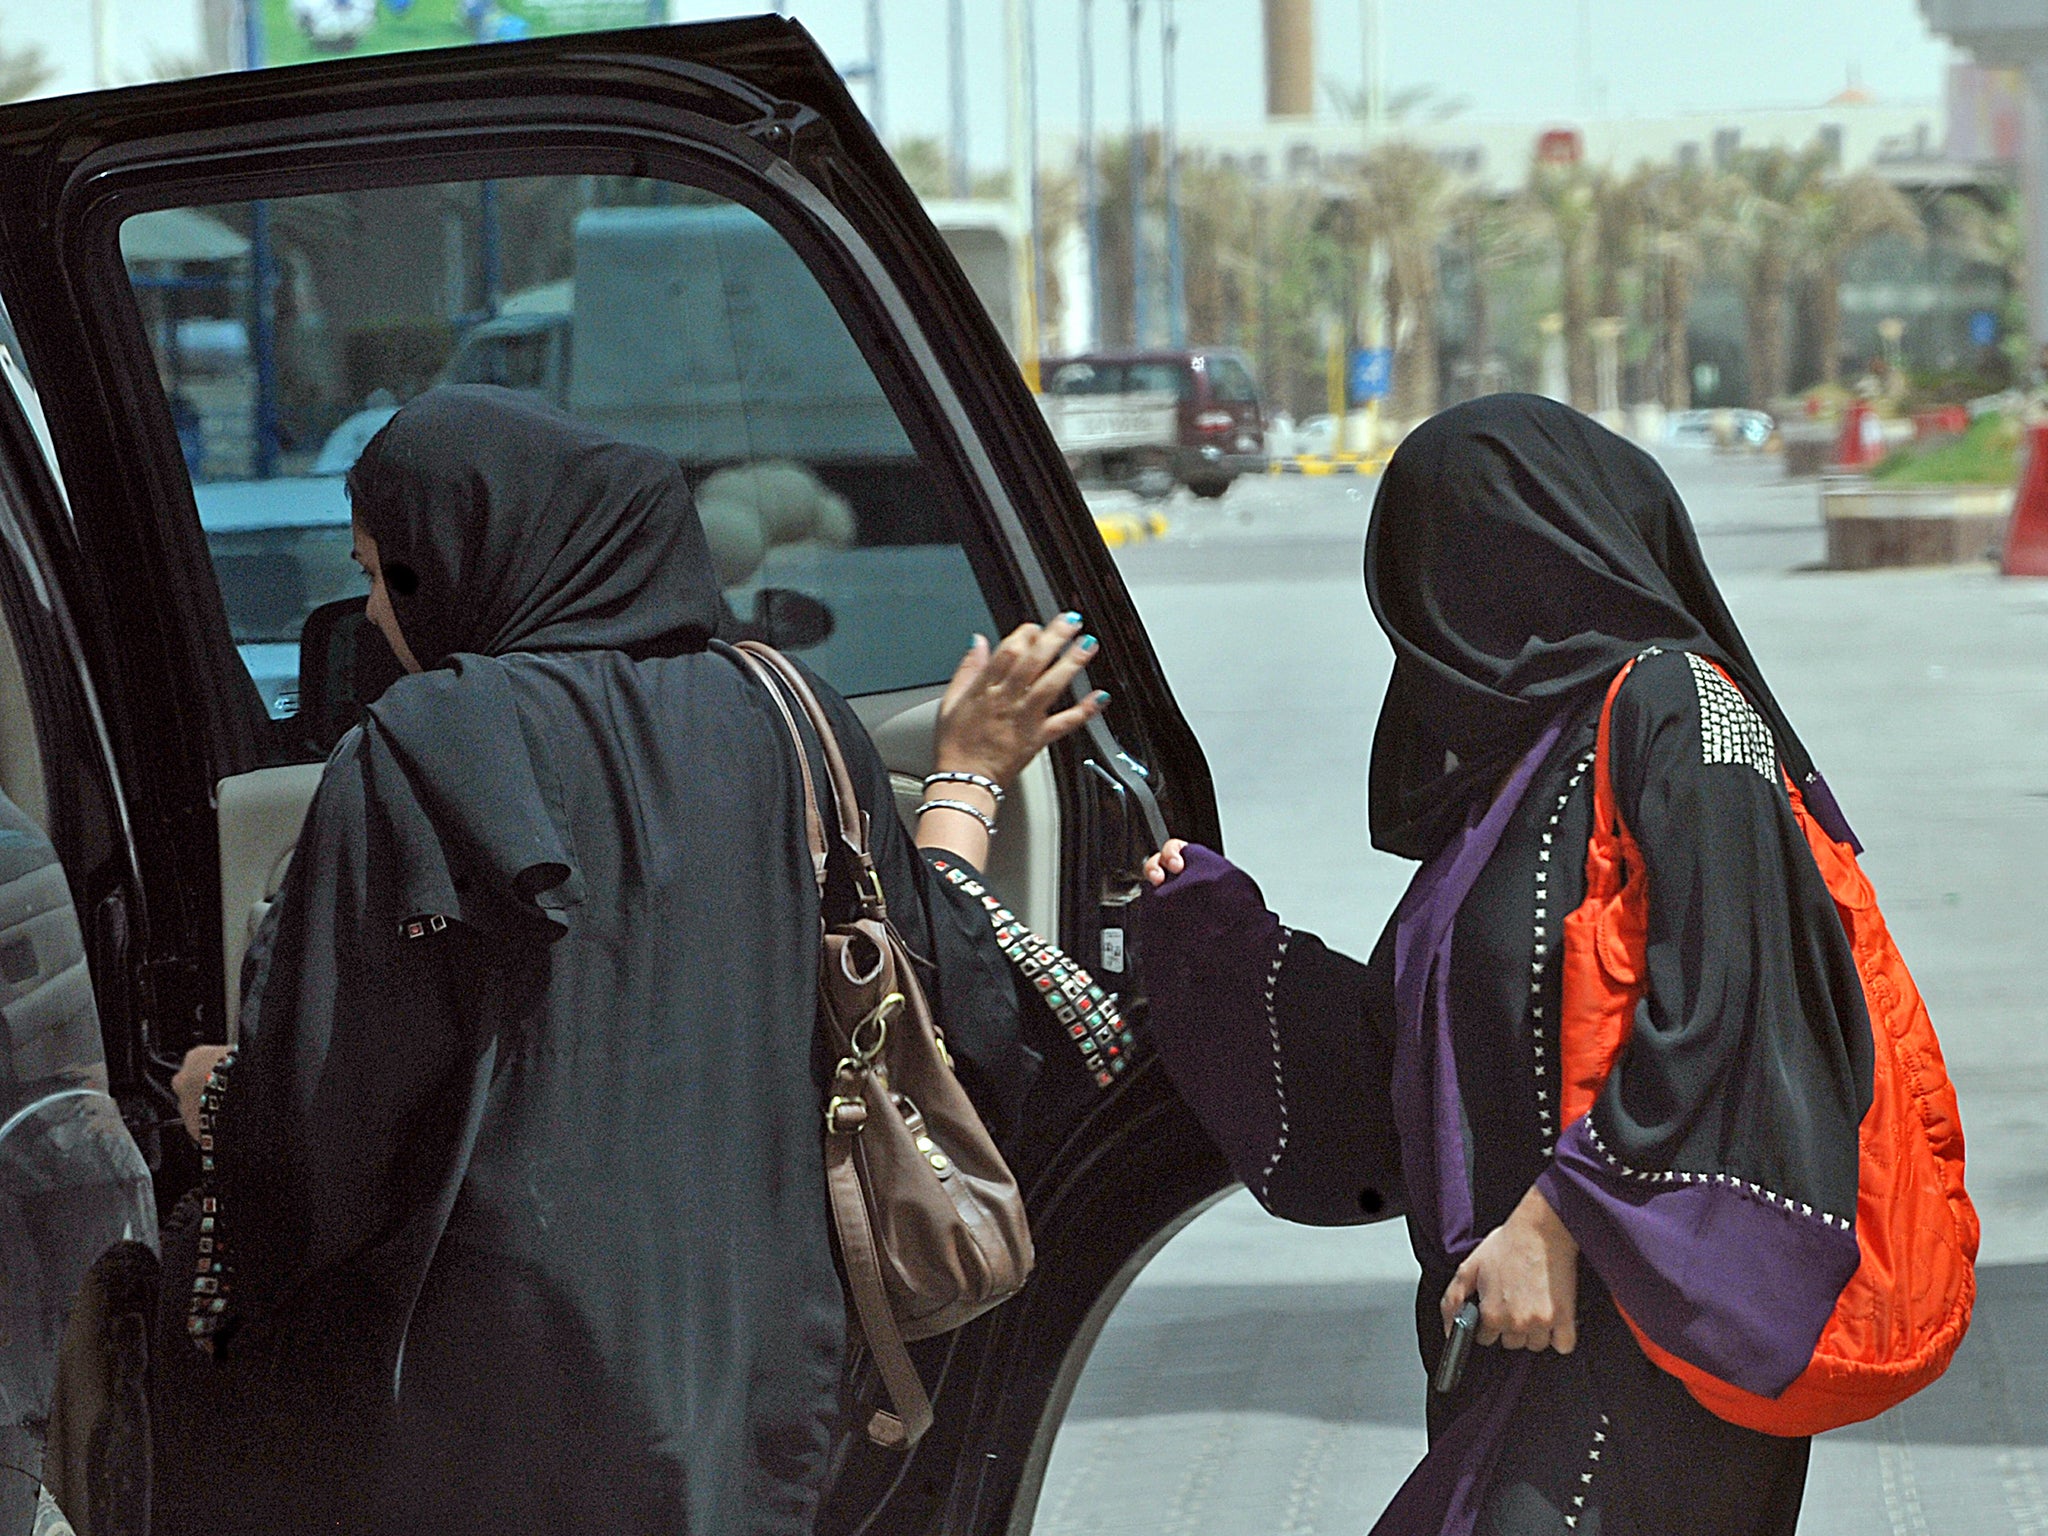 Women who drive in Saudi Arabia are perceived to be crossing boundaries and going against the country’s traditions and customs